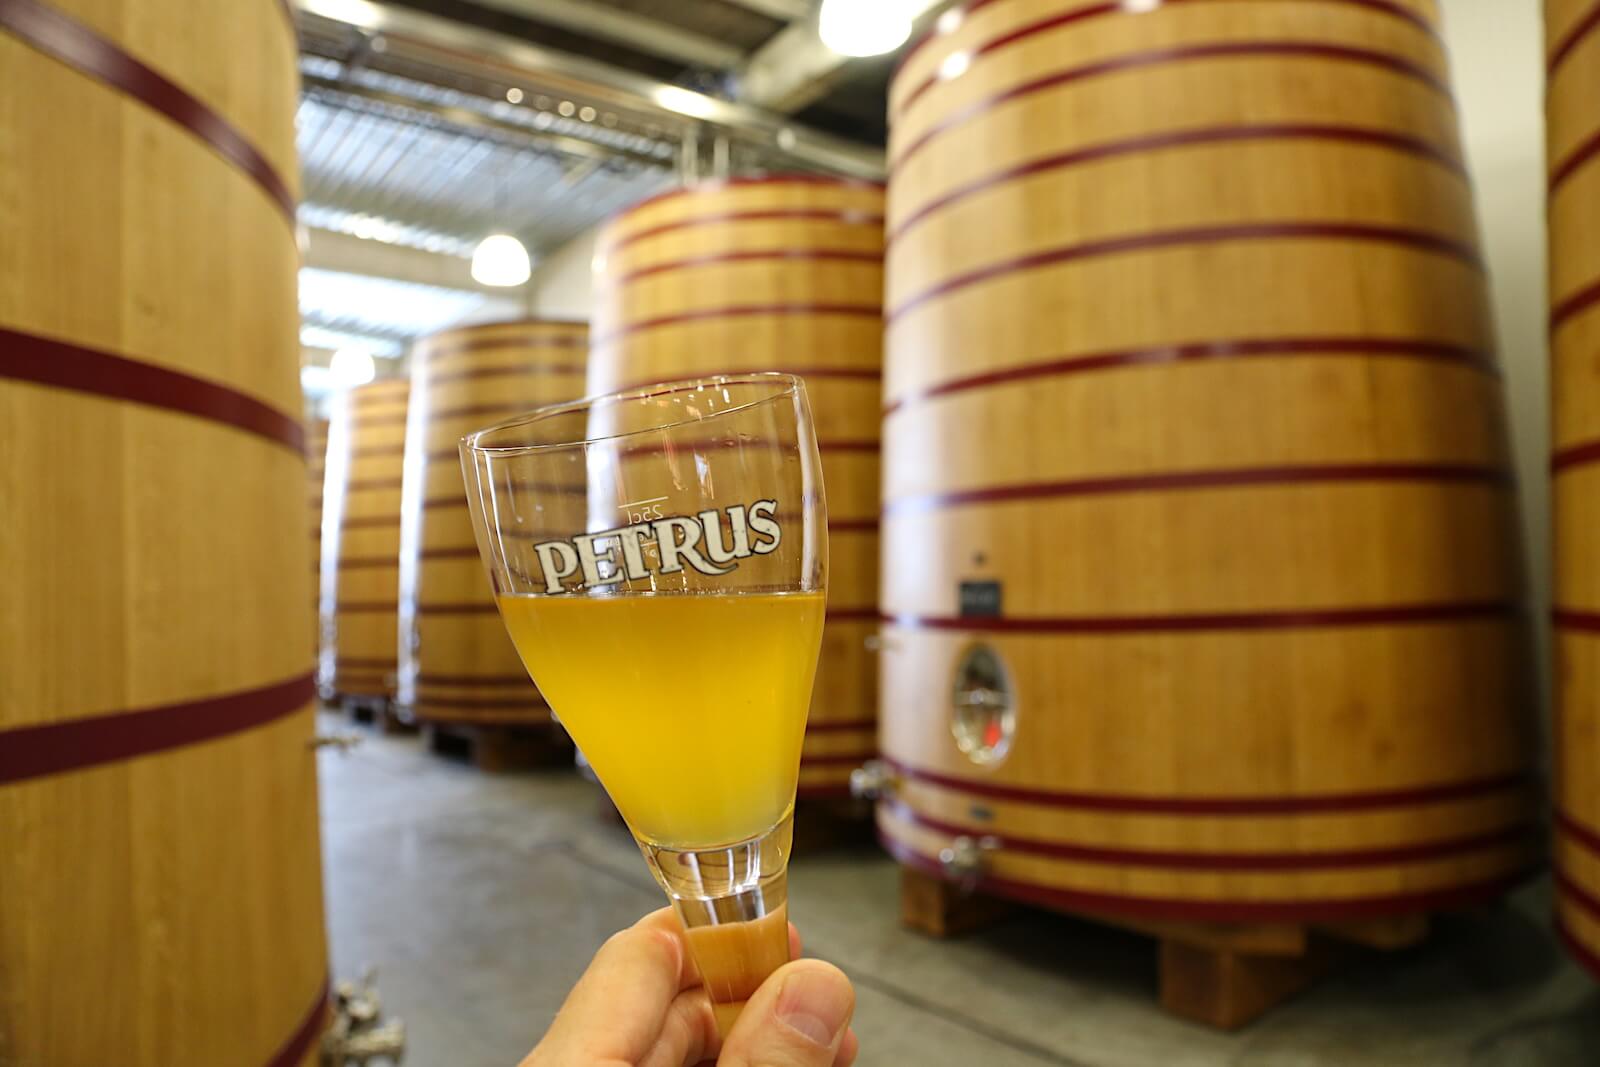 Petrus Aged Pale, straight from the foeder at Brouwerij De Brabandere.